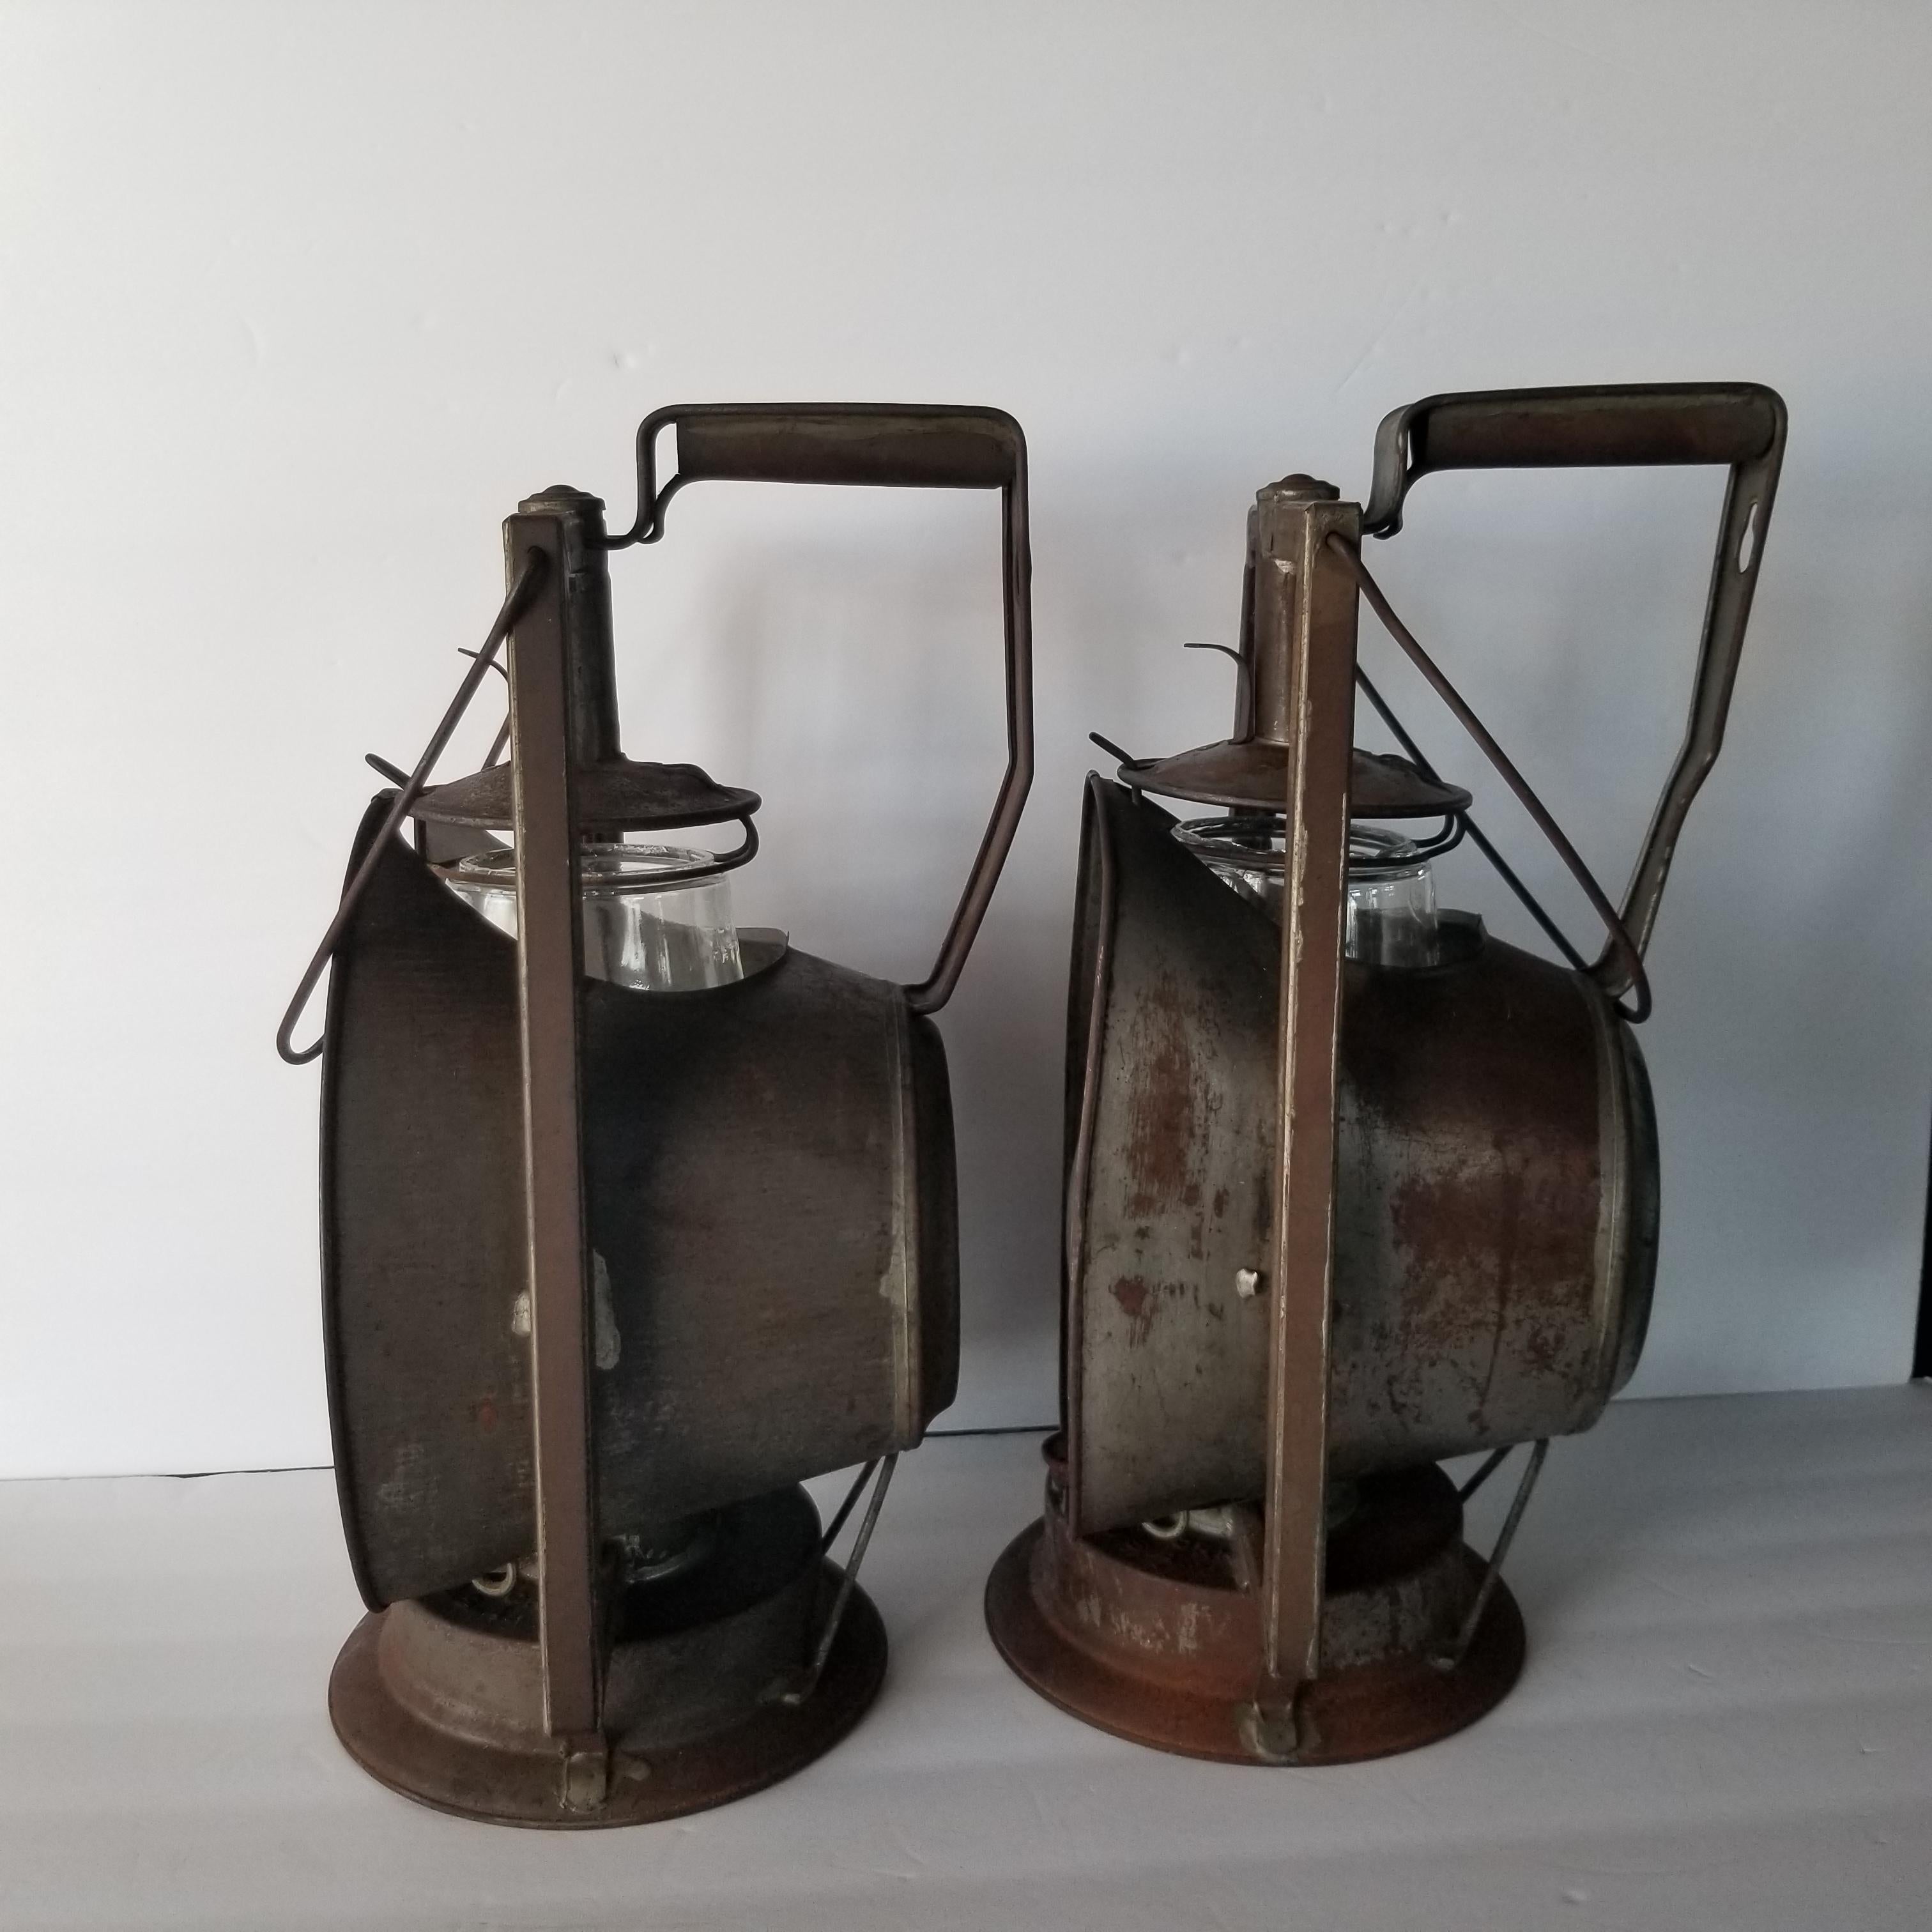 Metal Antique Dietz Acme Large Inspector Lamp Two Railroad Lanterns New York 1900s